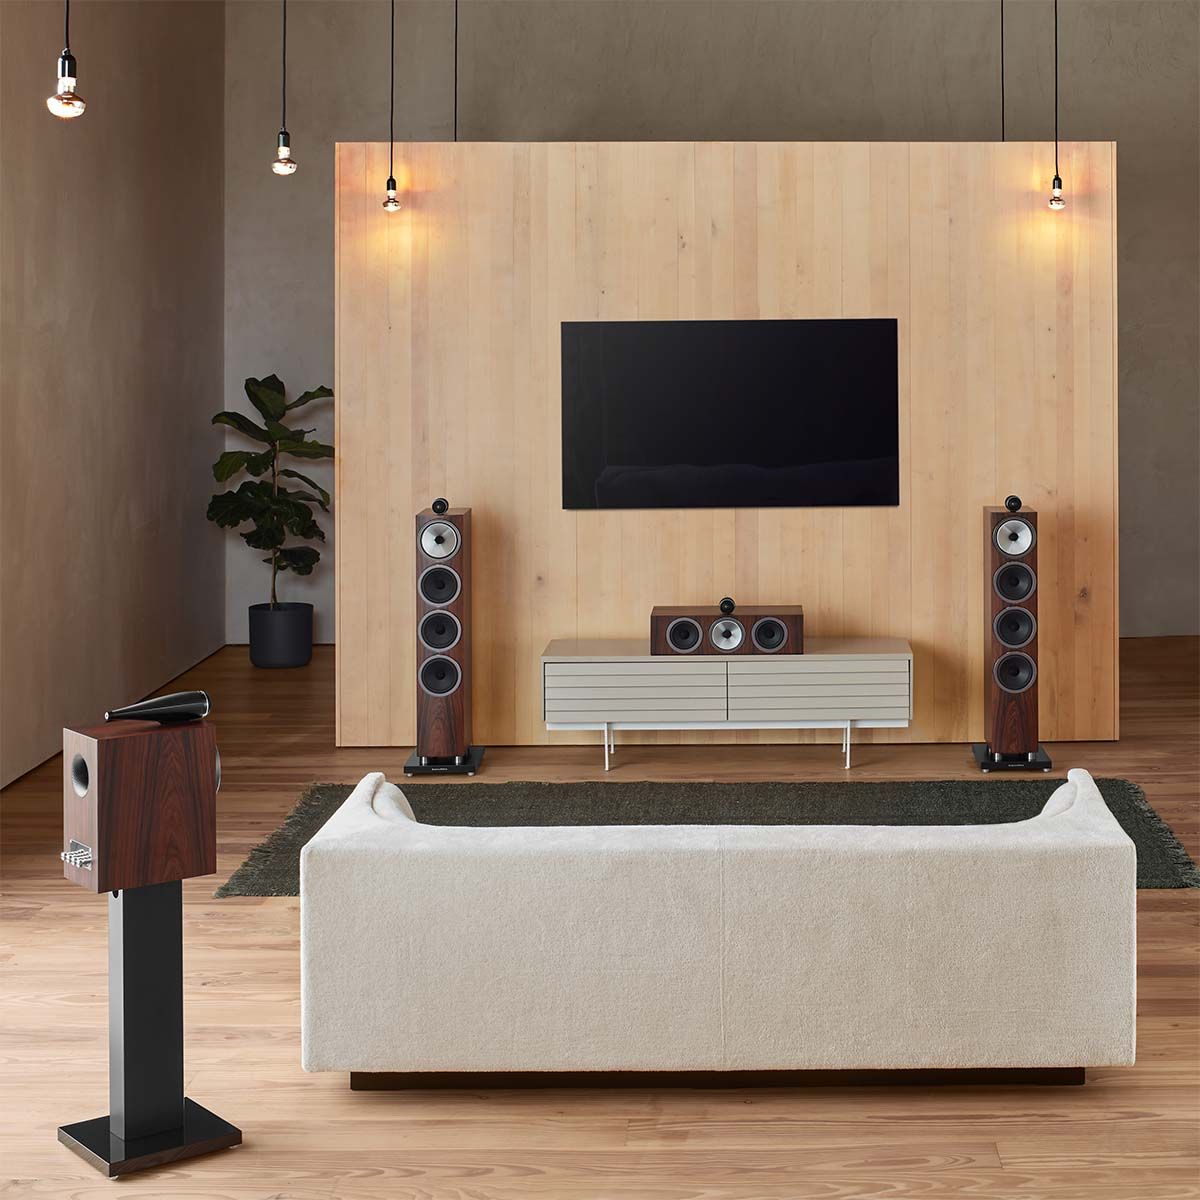 Bowers & Wilkins 702 S3 3-Way Floorstanding Loudspeaker in mocha shown in living room media room with center, surrounds, and tv